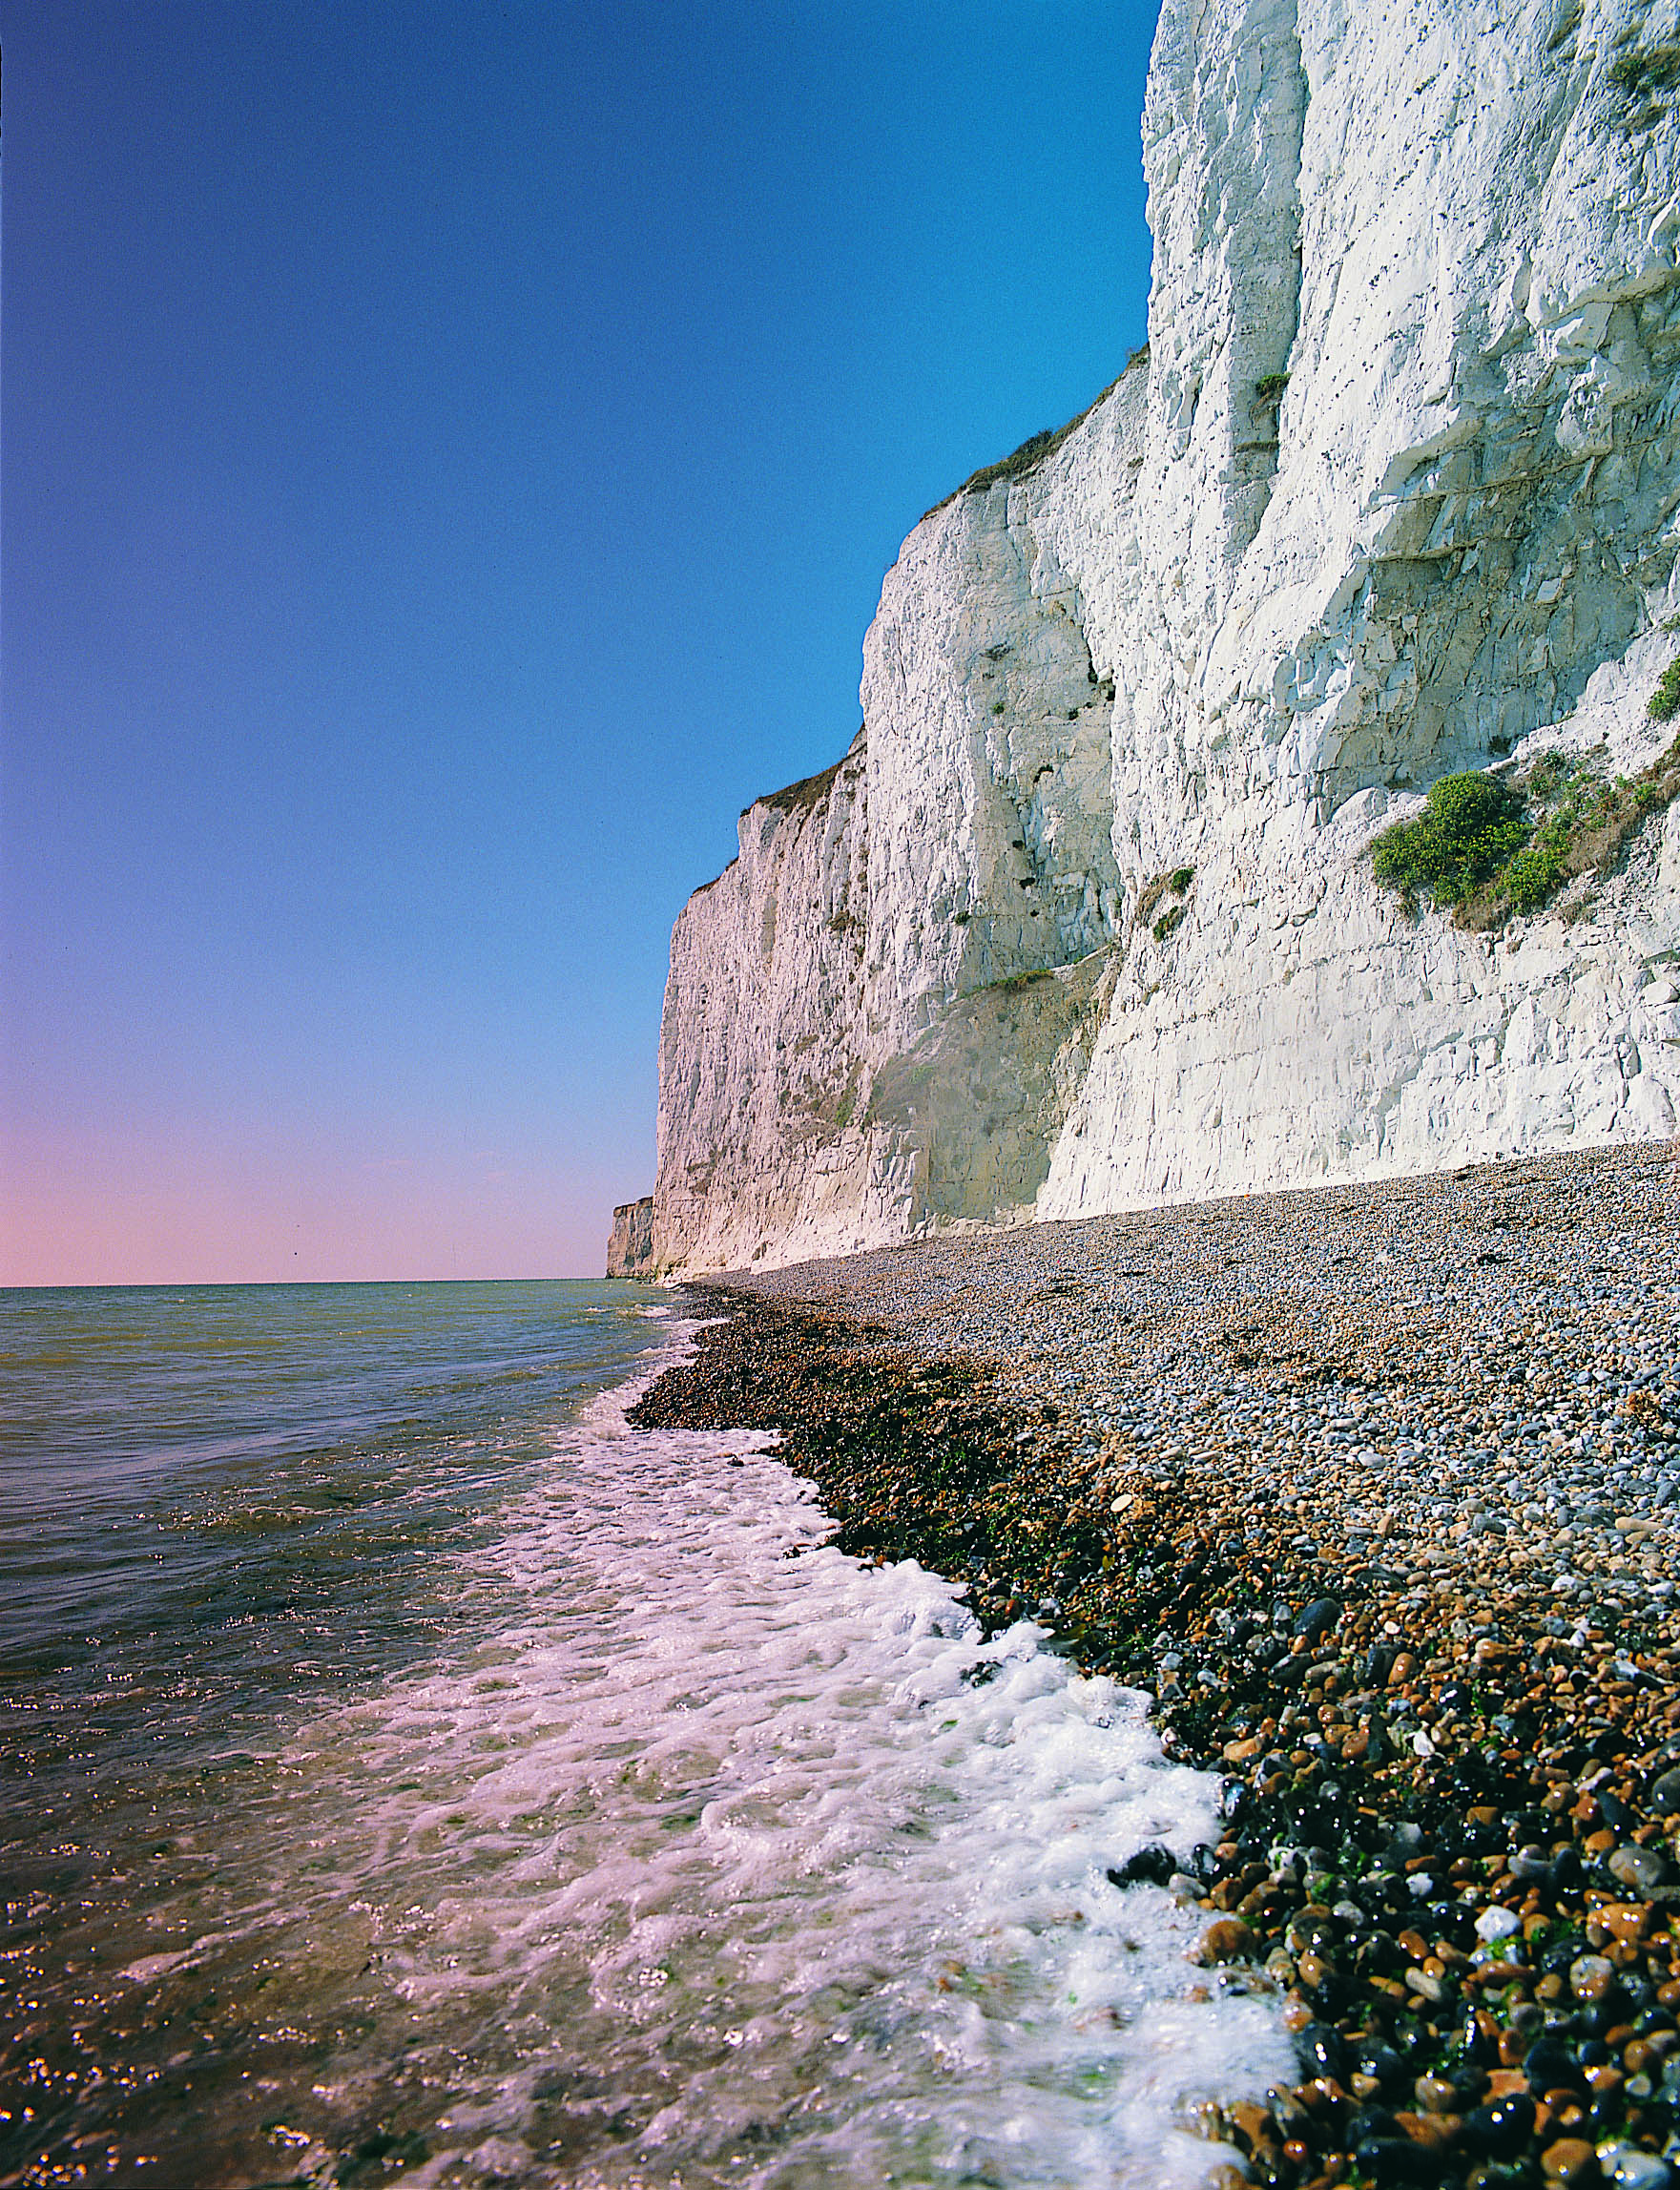 South Foreland with white cliffs on right, pebble beach with sea on left. Sunny pink sky.